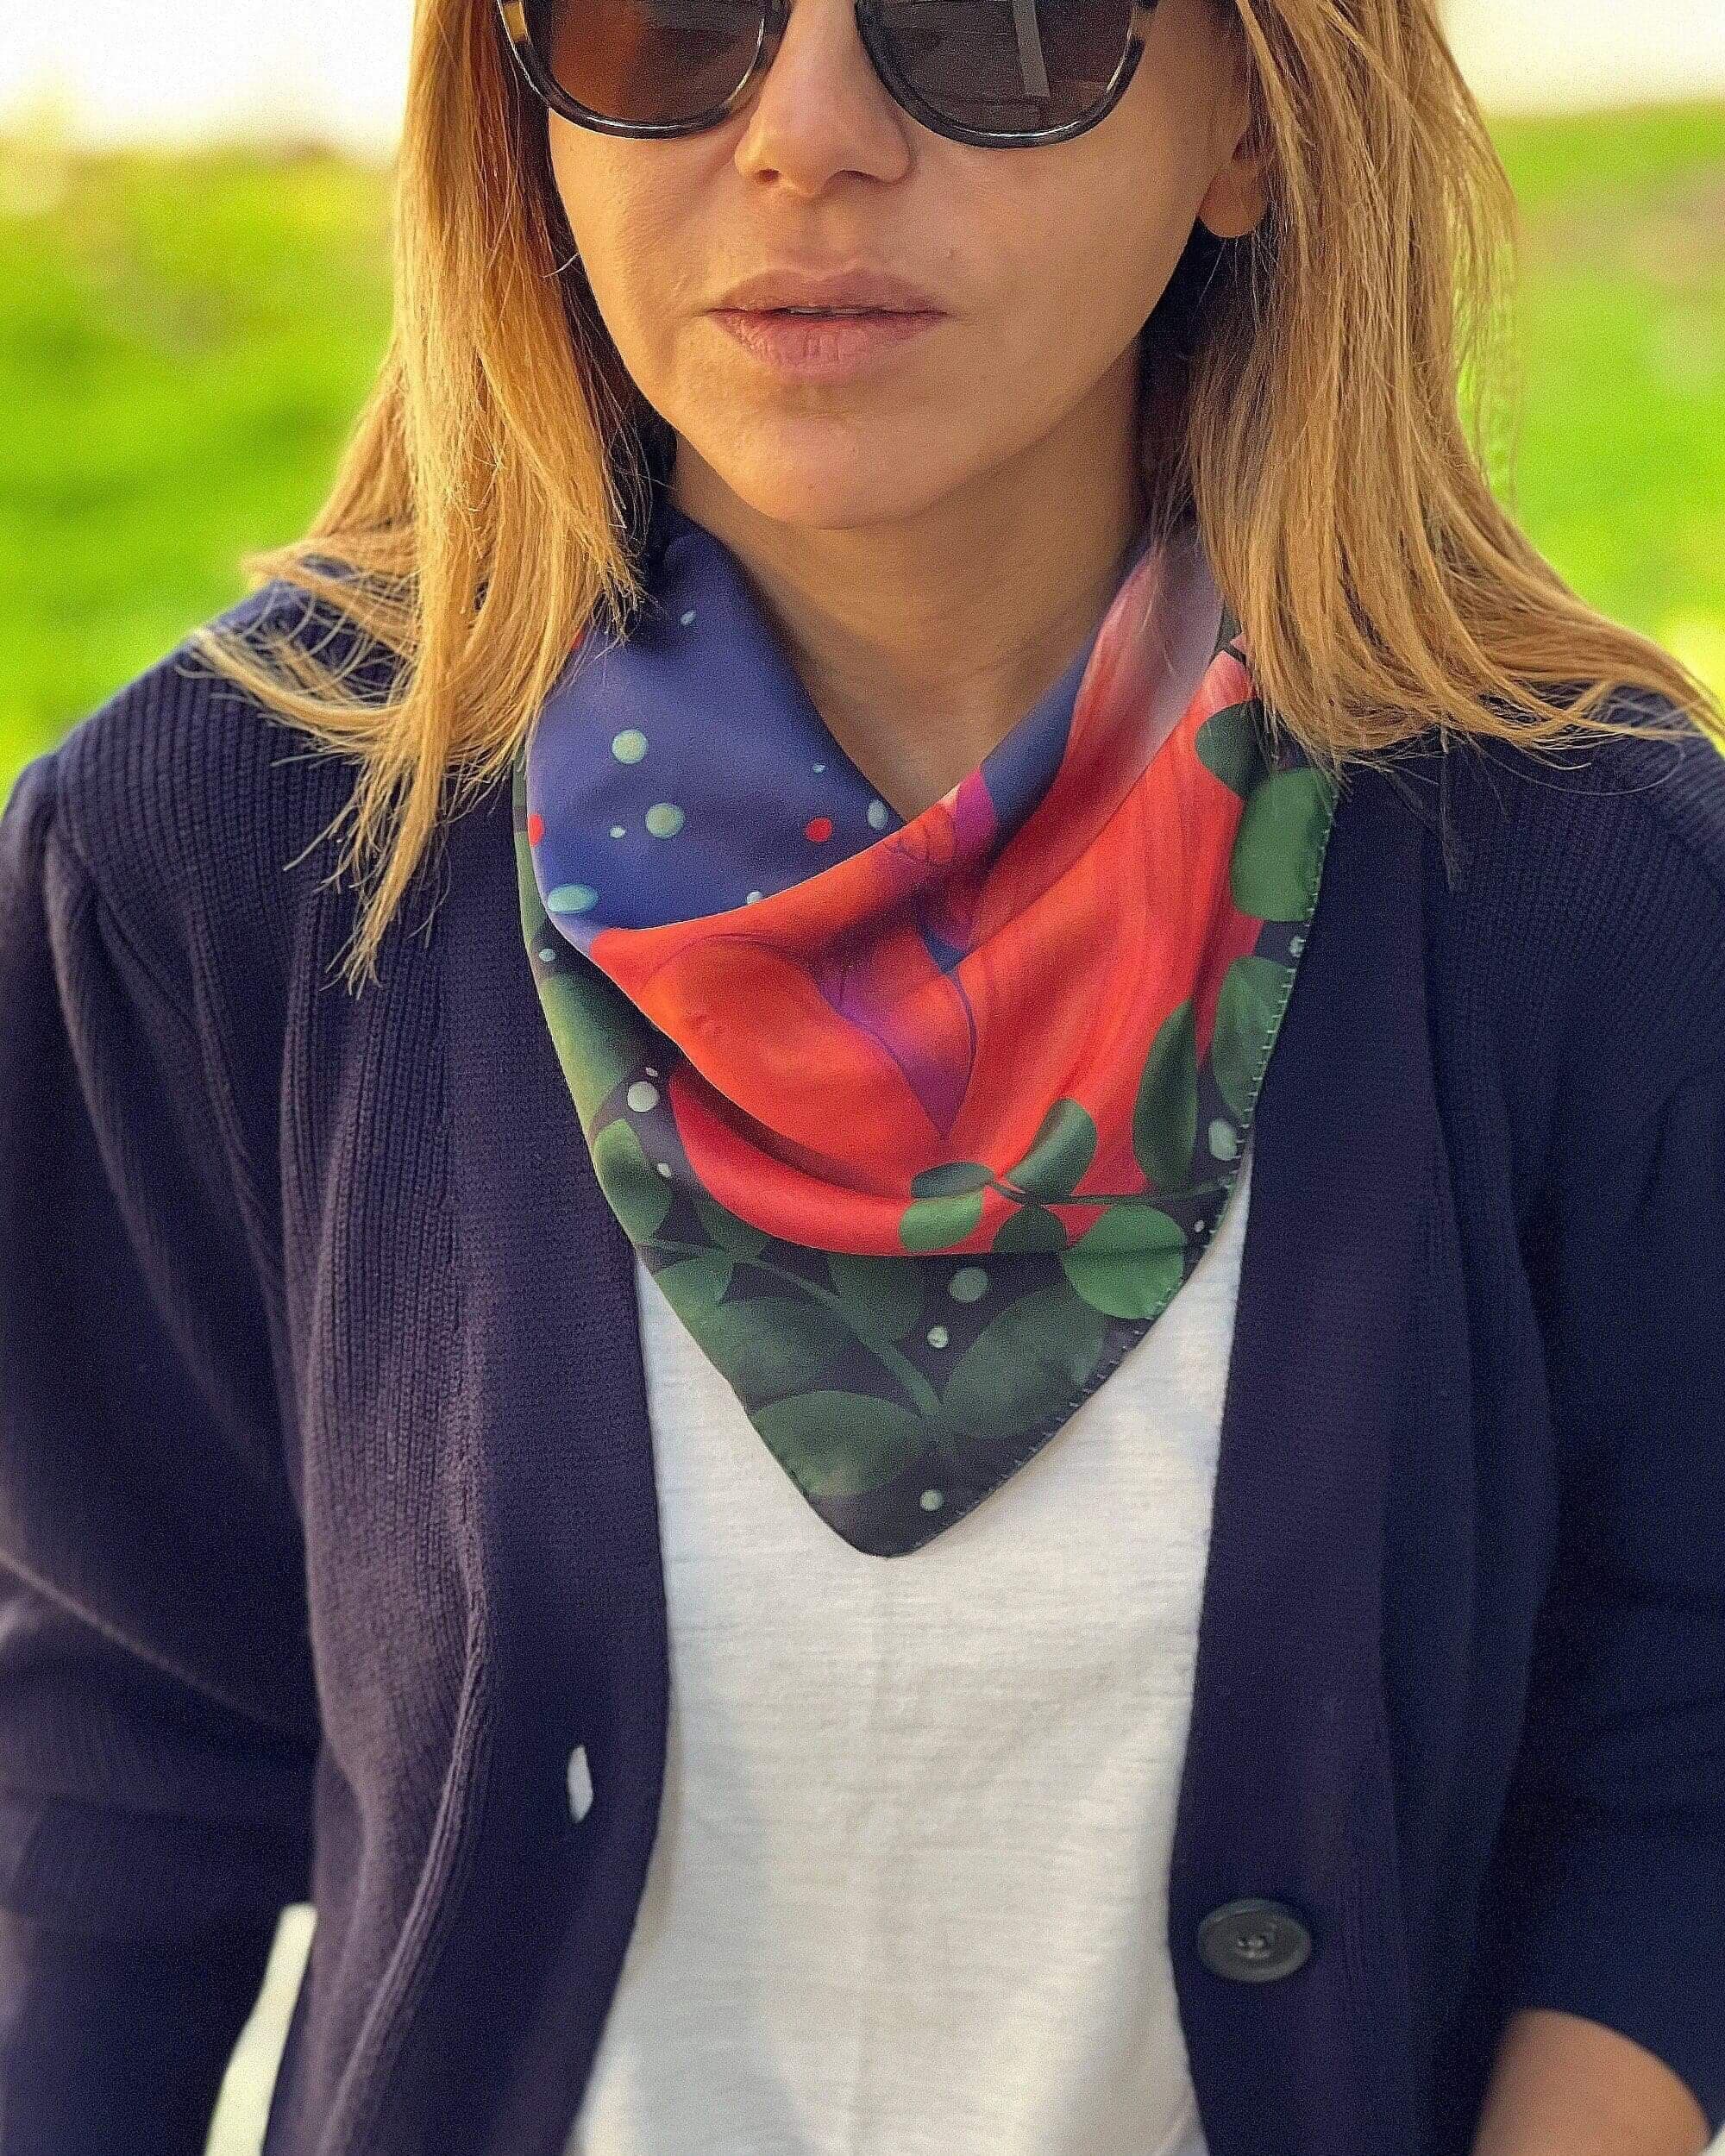 Get the best animal pattern satin scarf as a birthday gift for your loved ones. The scarf is made with high-quality silk satin and features beautiful fox patterns.